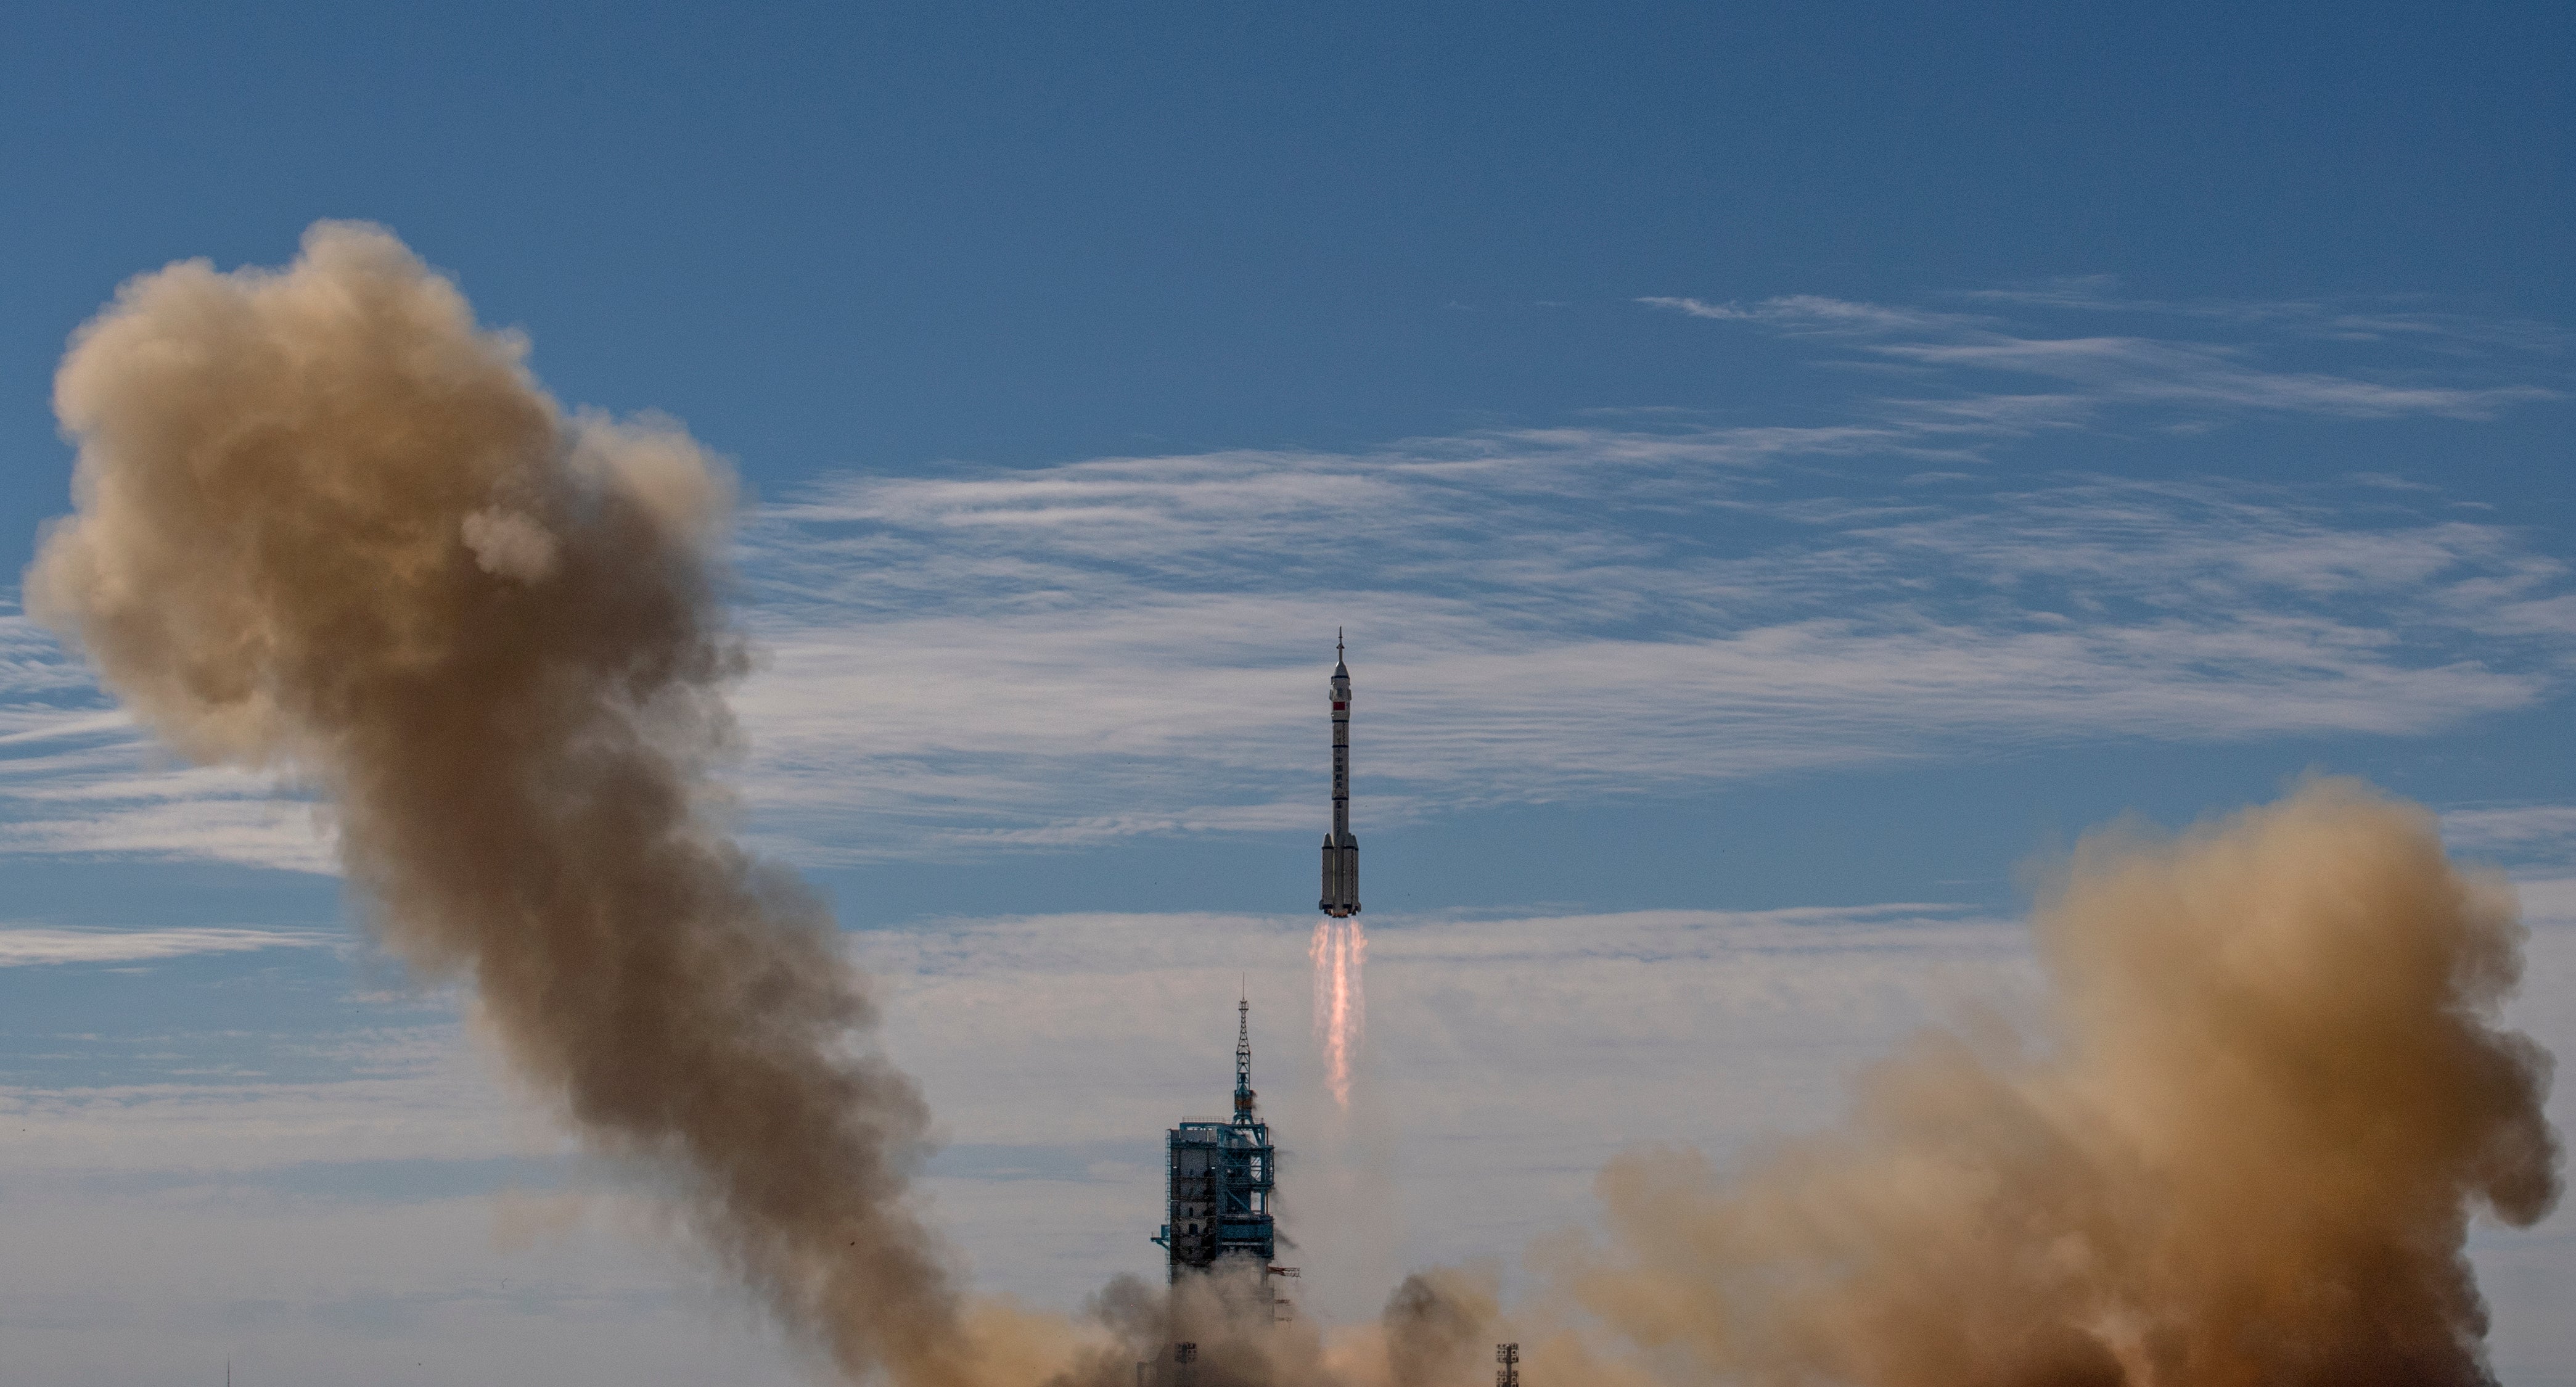 Shenzhou-12 spacecraft from China’s Manned Space Agency onboard the Long March-2F rocket launches with three Chinese astronauts onboard at the Jiuquan Satellite Launch Center on 17 June, 2021, in Jiuquan, Gansu province, China